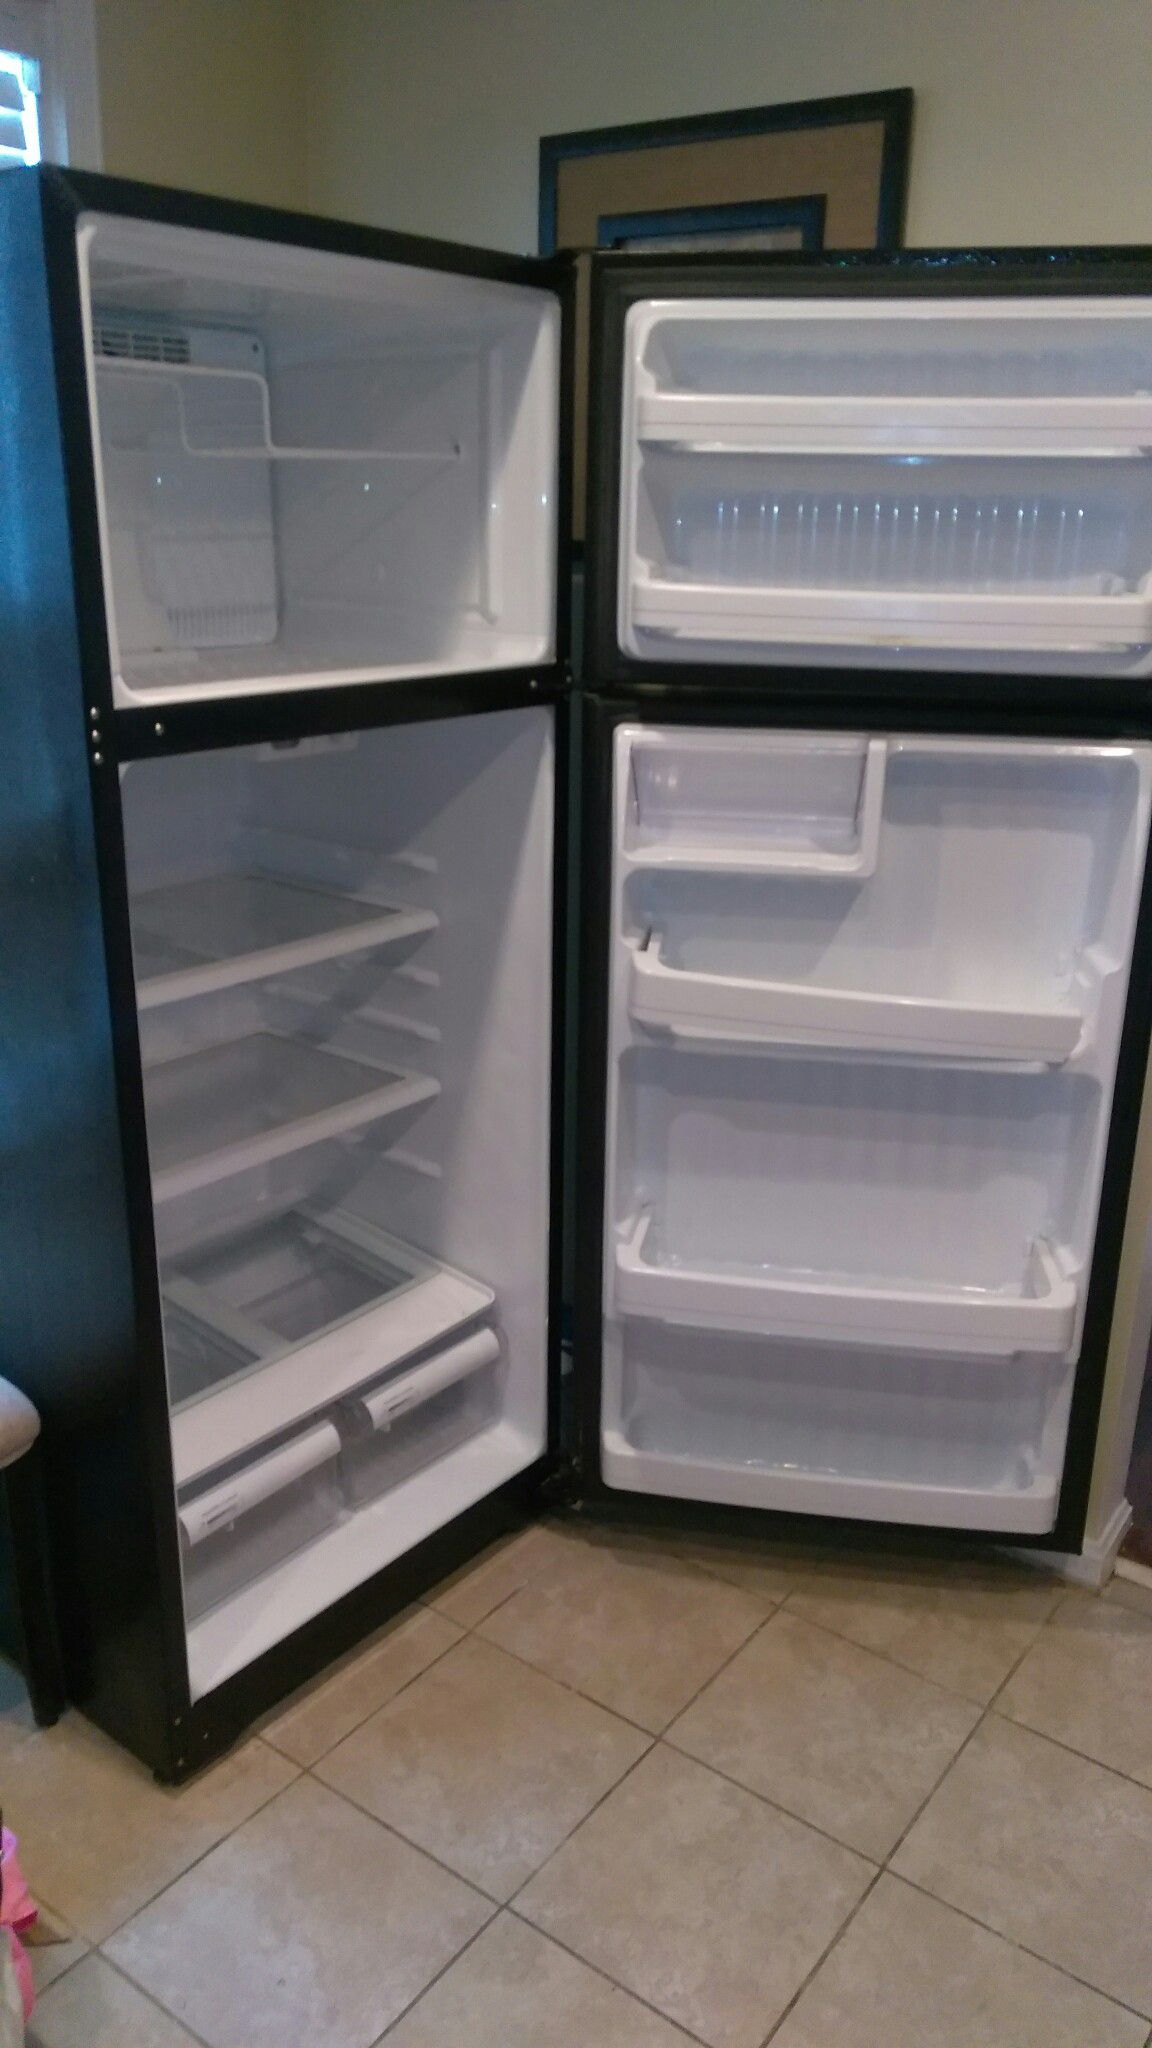 Ge top and bottom refrigerator. Excellent condition